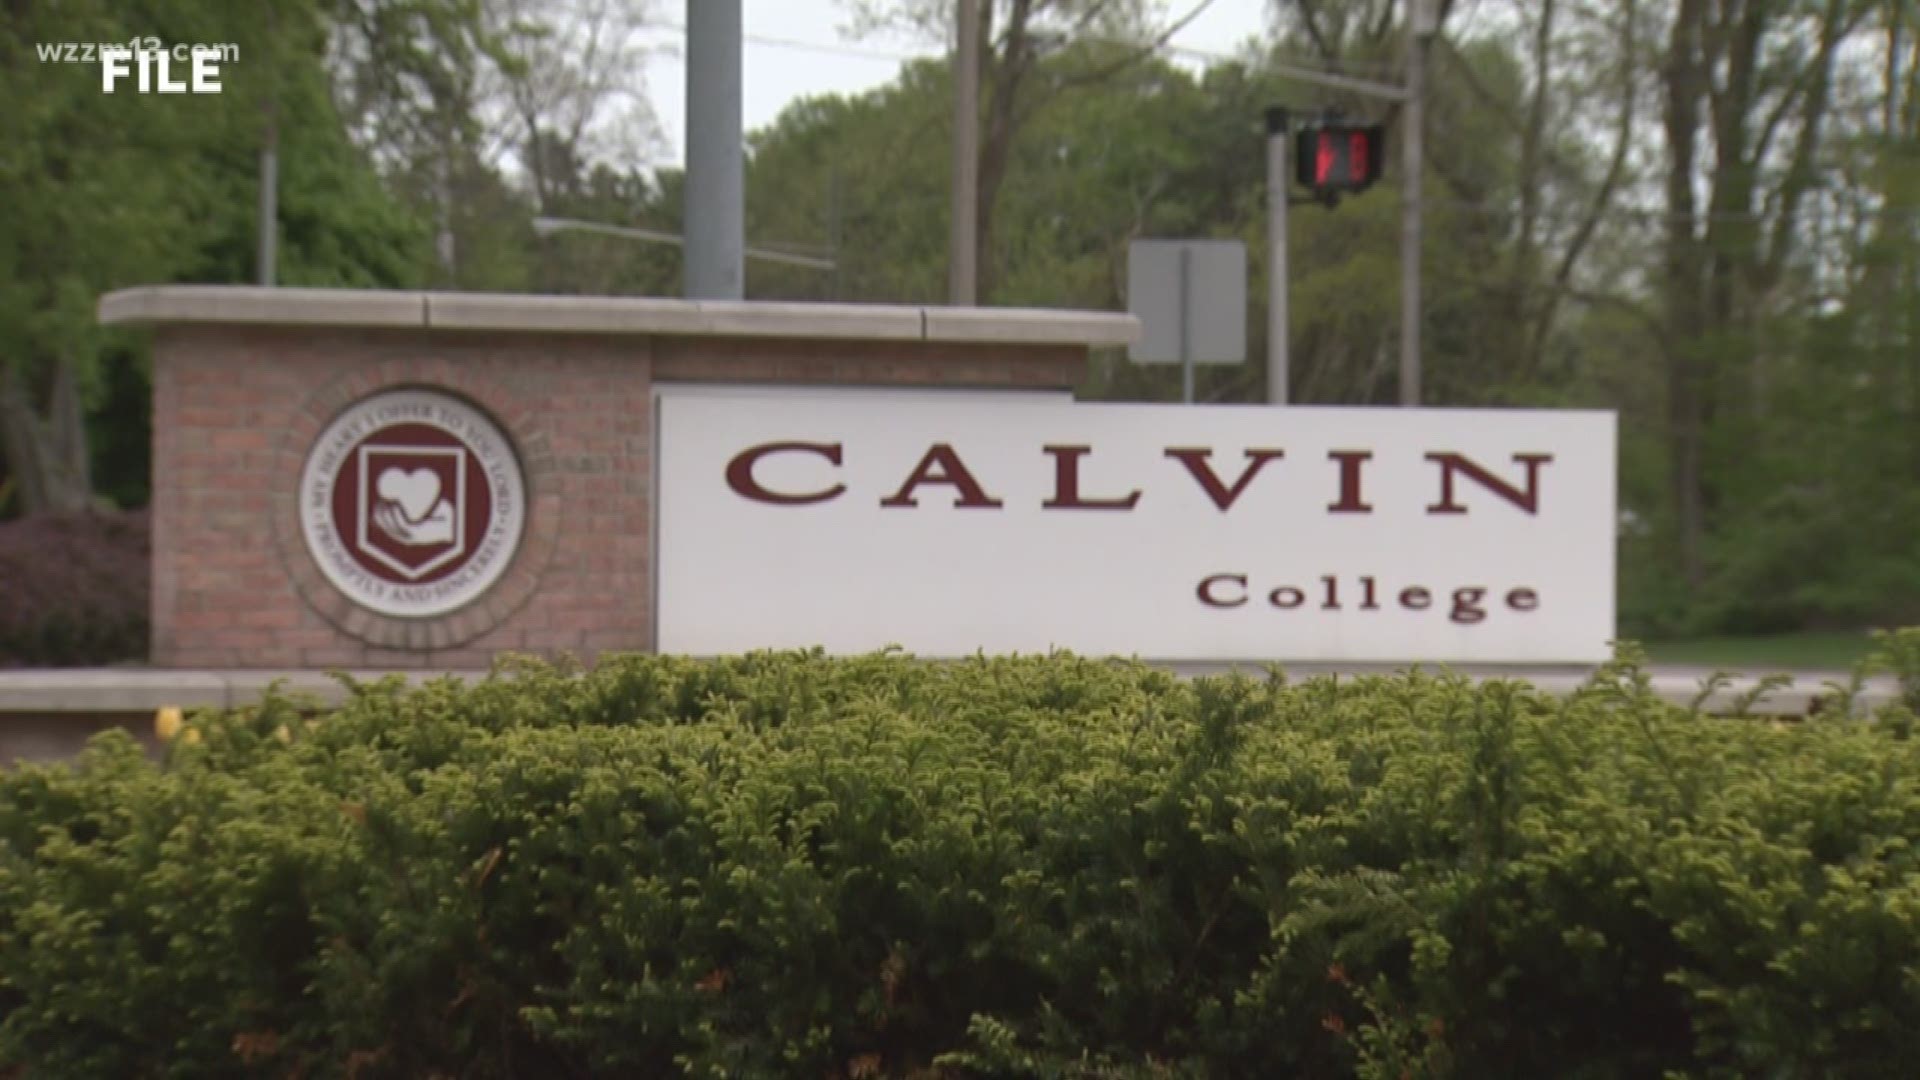 Calvin College to be a university in 2019